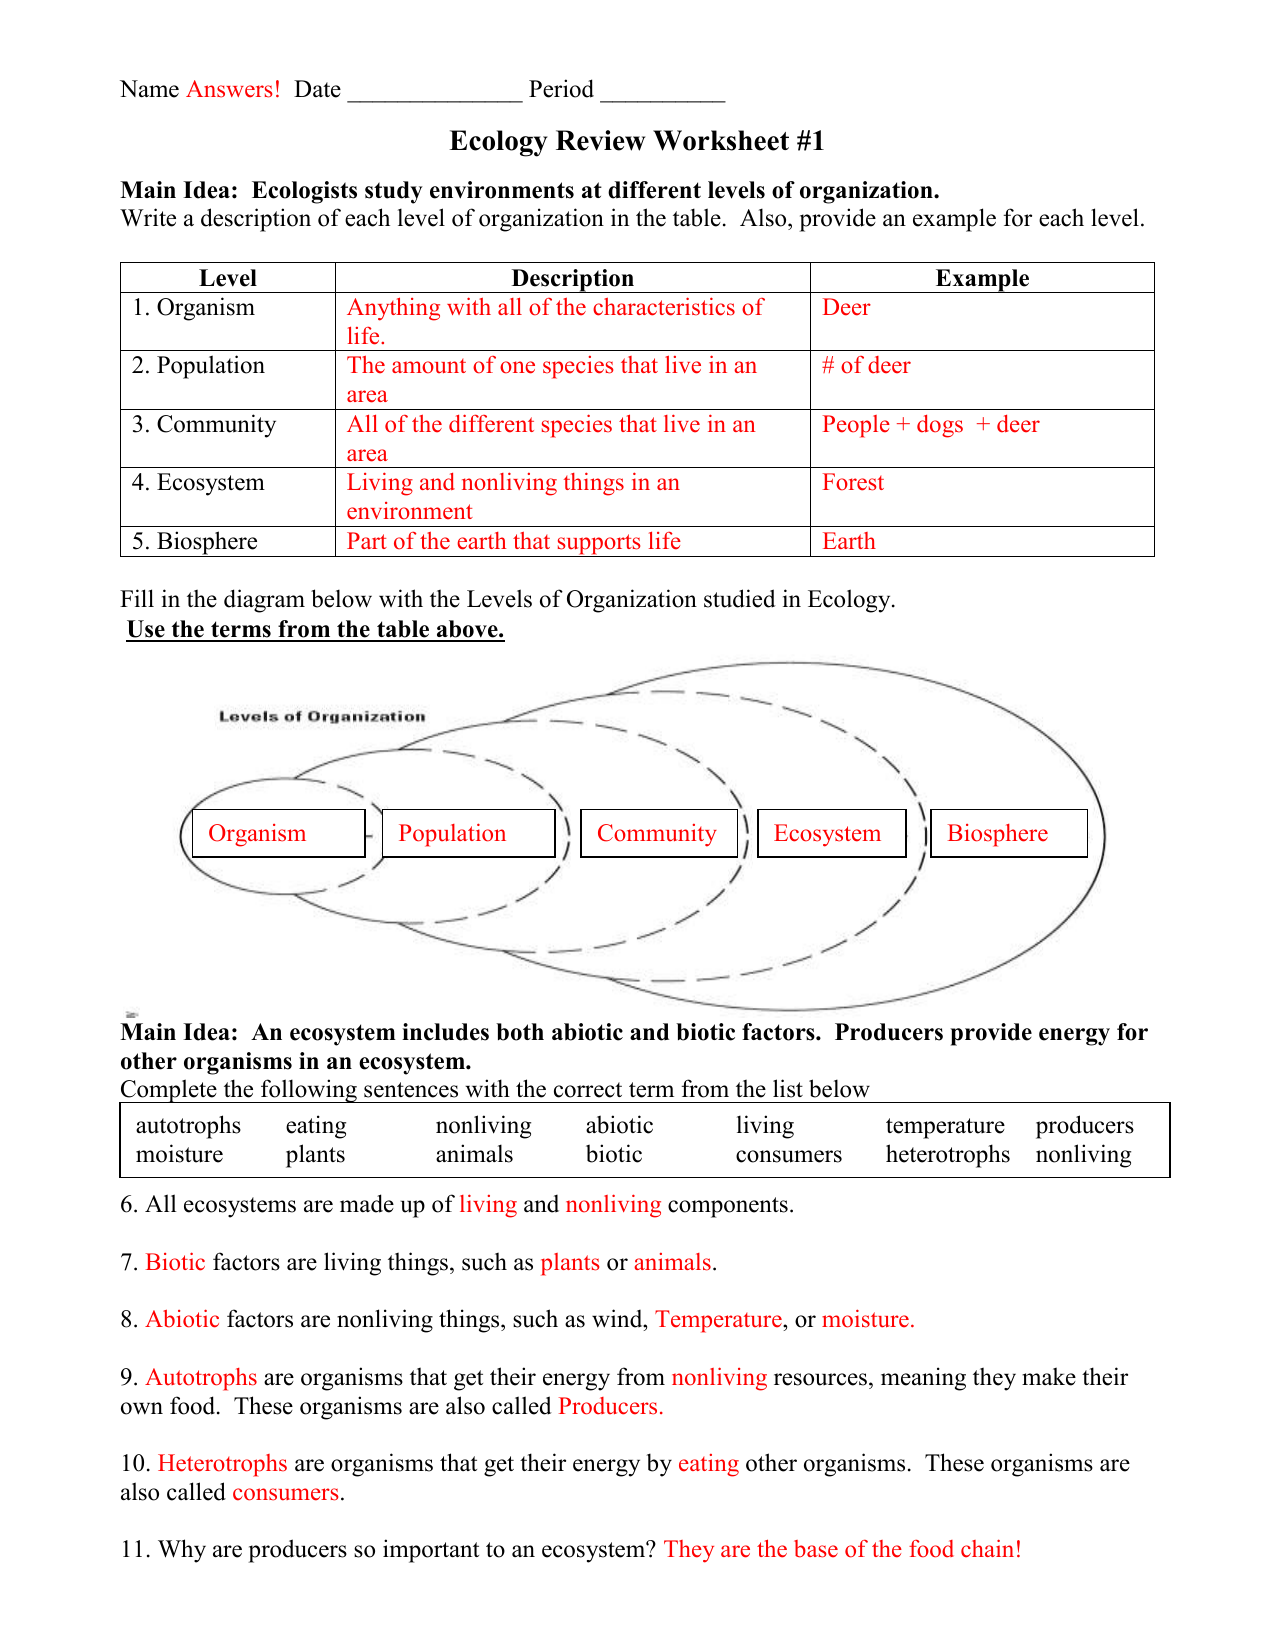 ecology-review-worksheet-22-answers In Ecology Review Worksheet 1